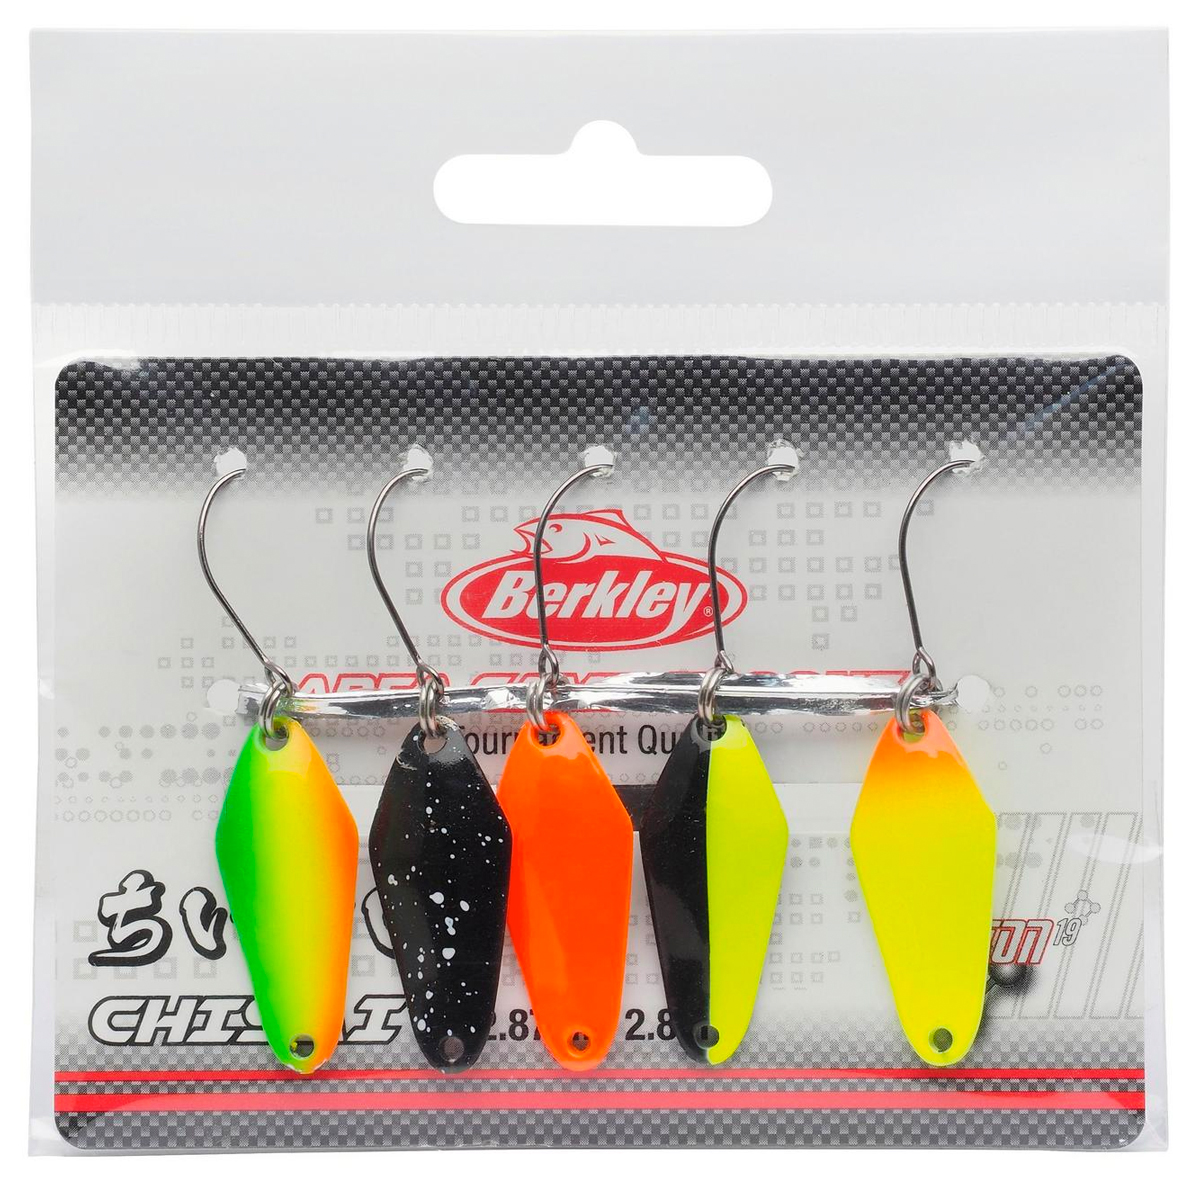 Berkley Area Game Spoons 5 Pack - Chisai